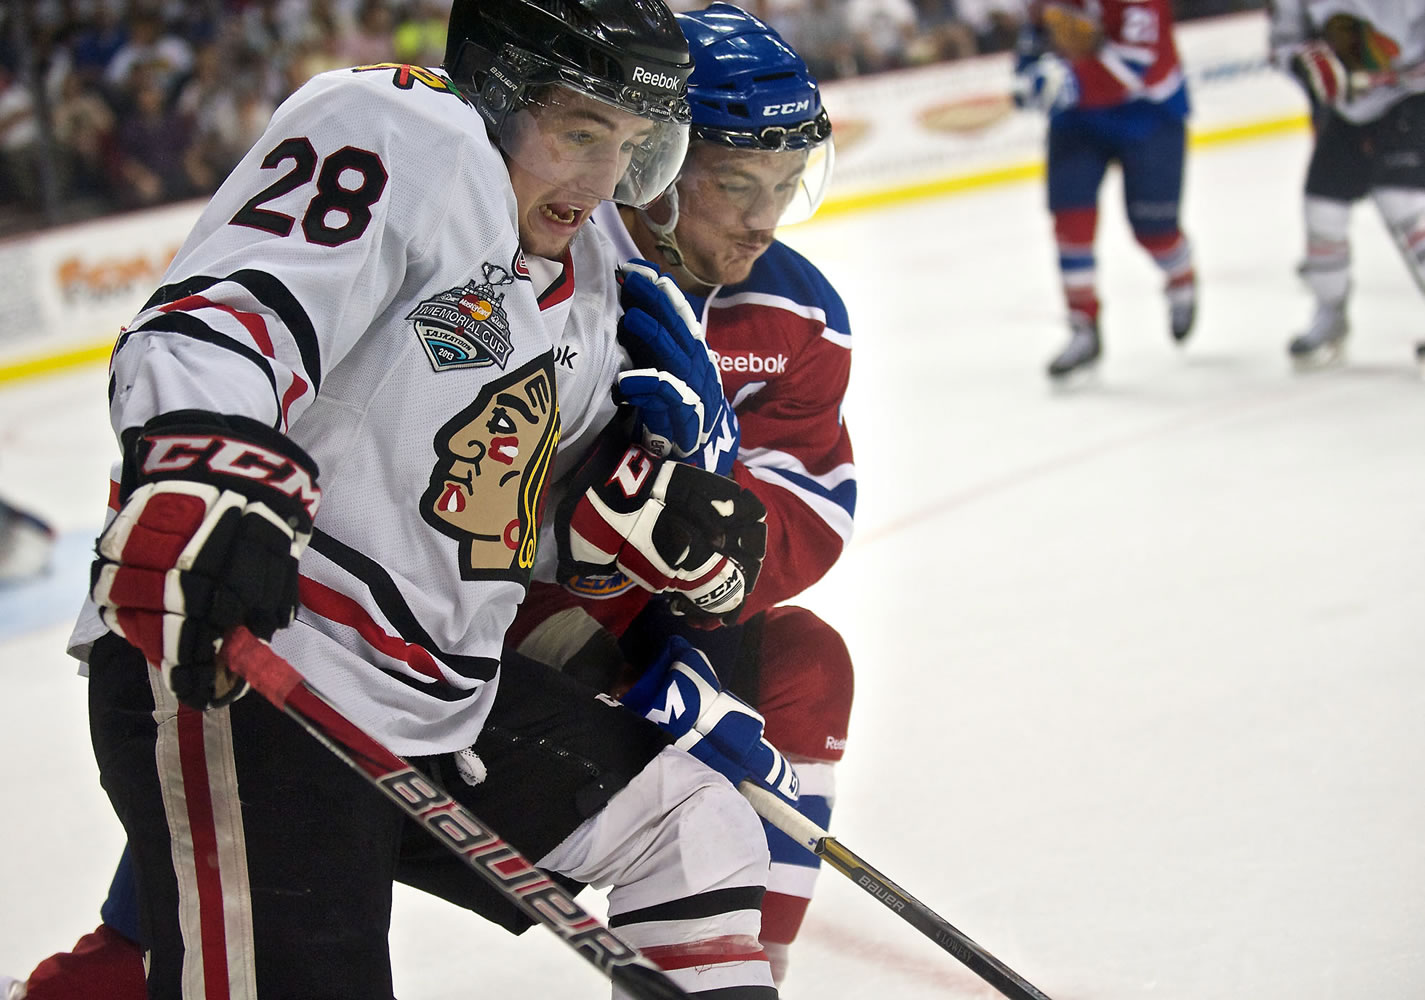 Portland's Brendan Leipsic gets blocked into the glass during the second period Friday.